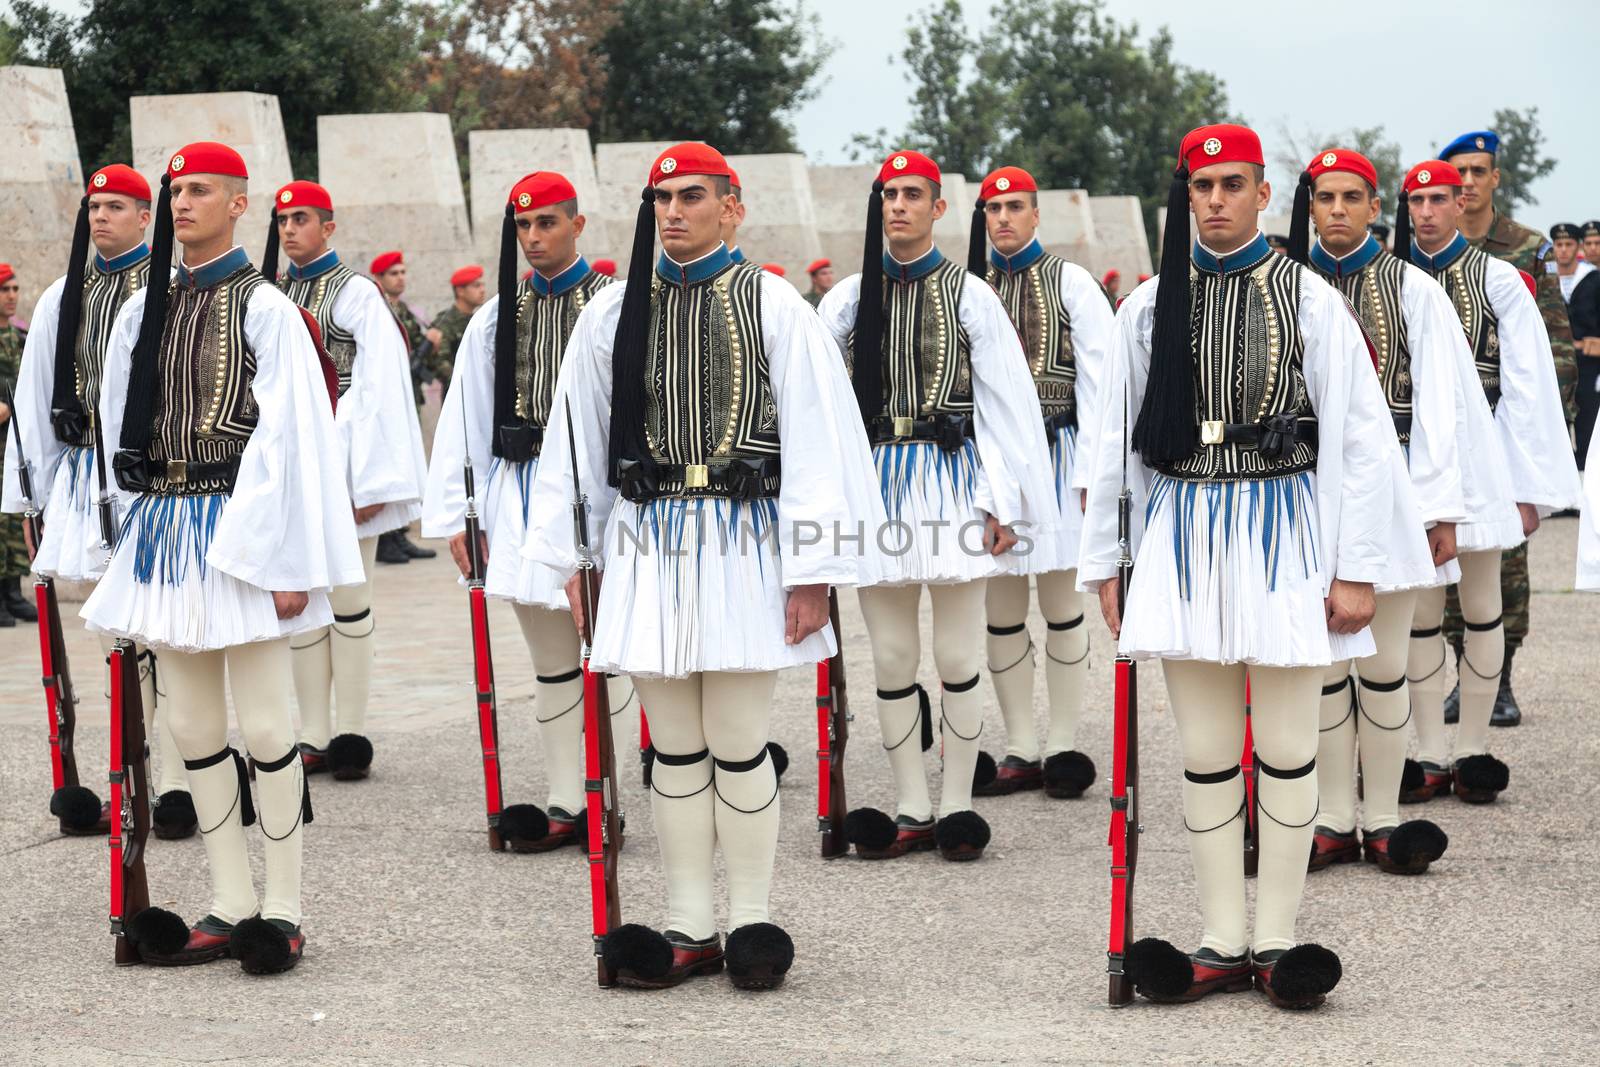 100th liberation anniversary from the City's 500 years Ottoman by Portokalis